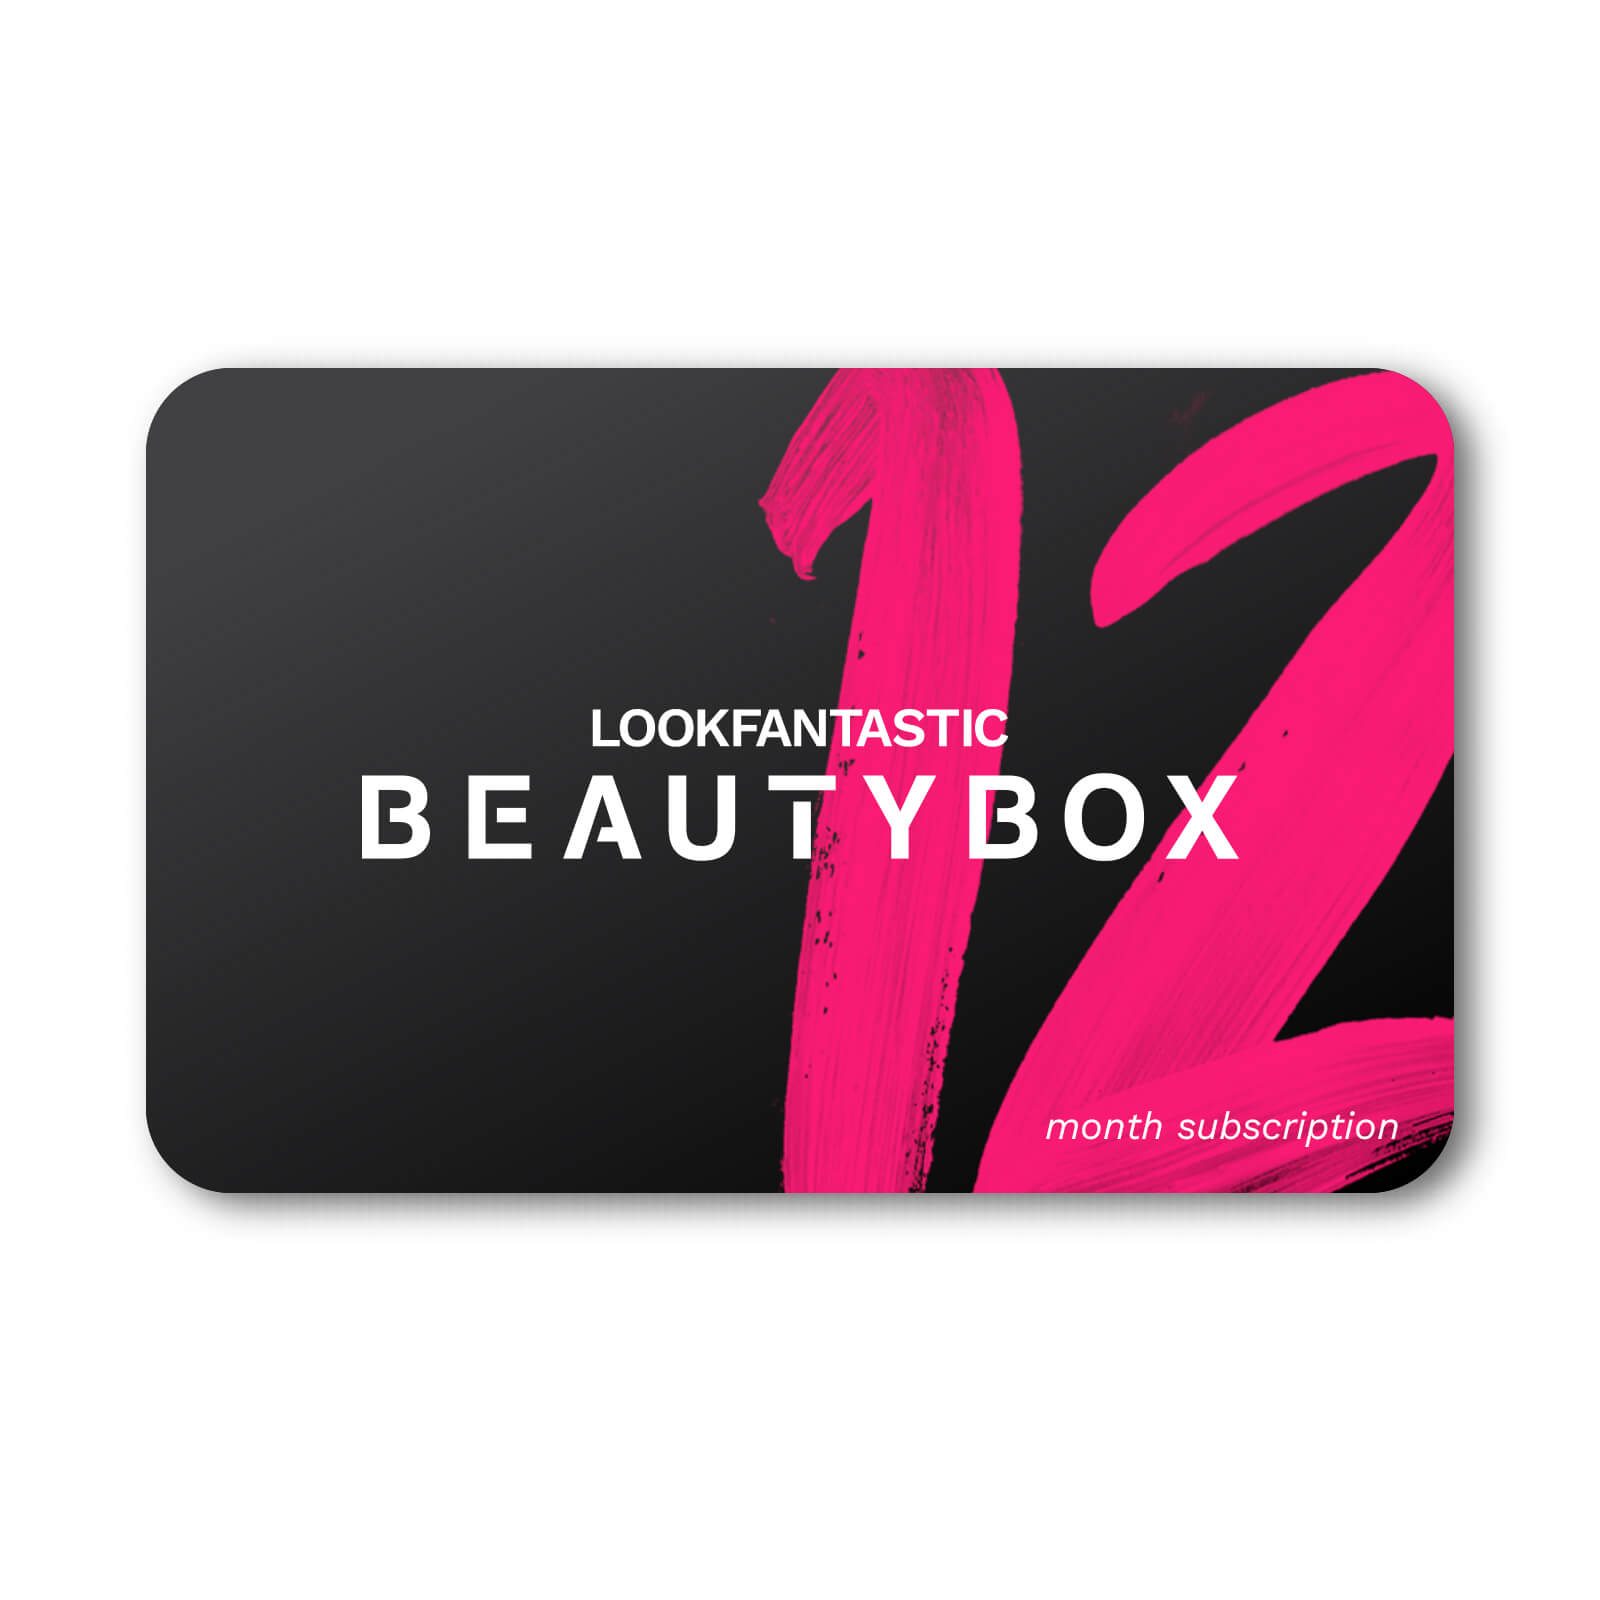 LOOKFANTASTIC Beauty Box 12 Month Subscription Gift Voucher